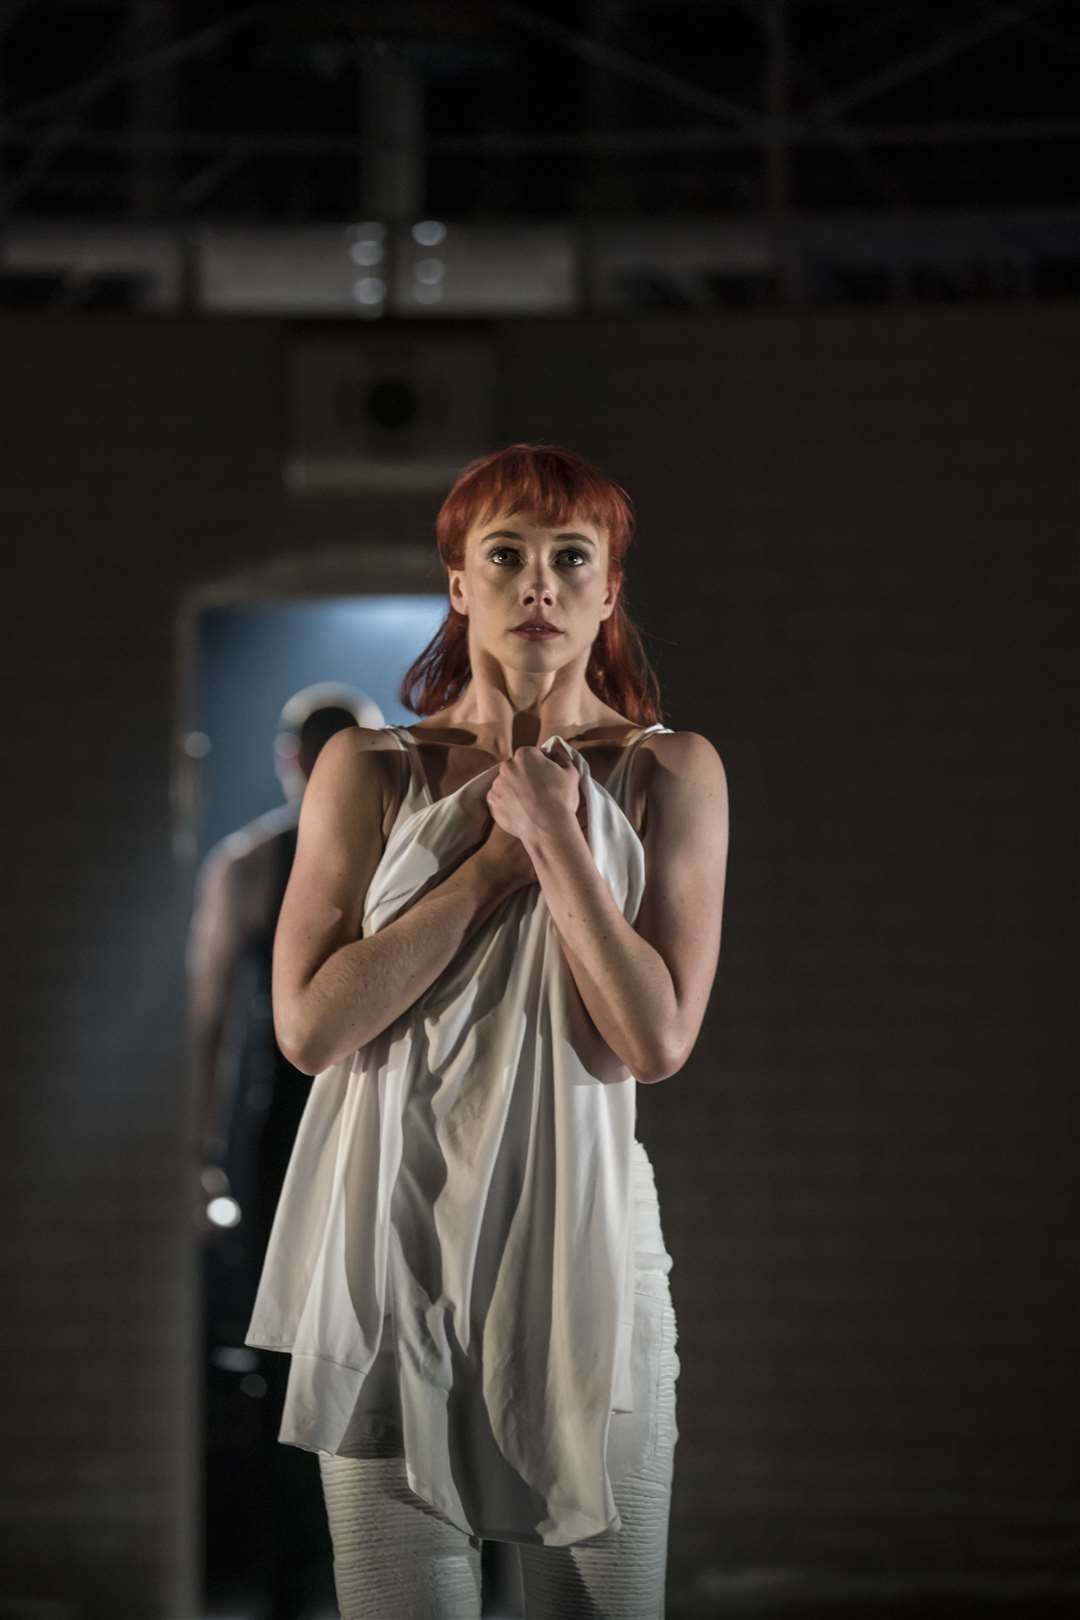 Juliet fears for her life after the security guard abuses her Matthew Bourne's Romeo and Juliet at the Marlowe Theatre. Credit: Johan Persson